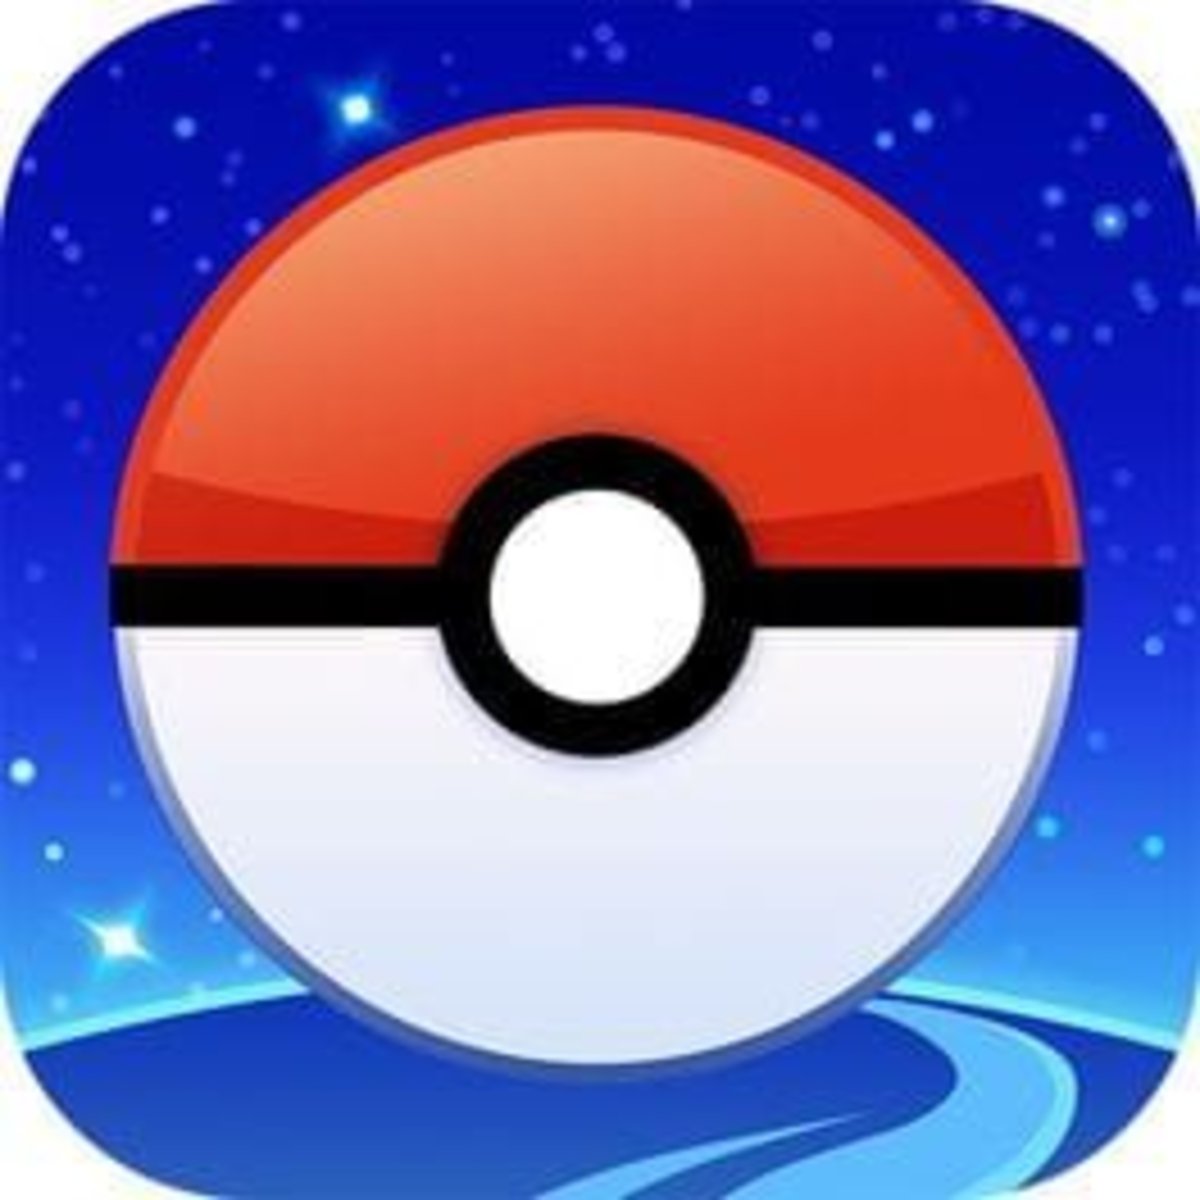 September Community Day date, time and more